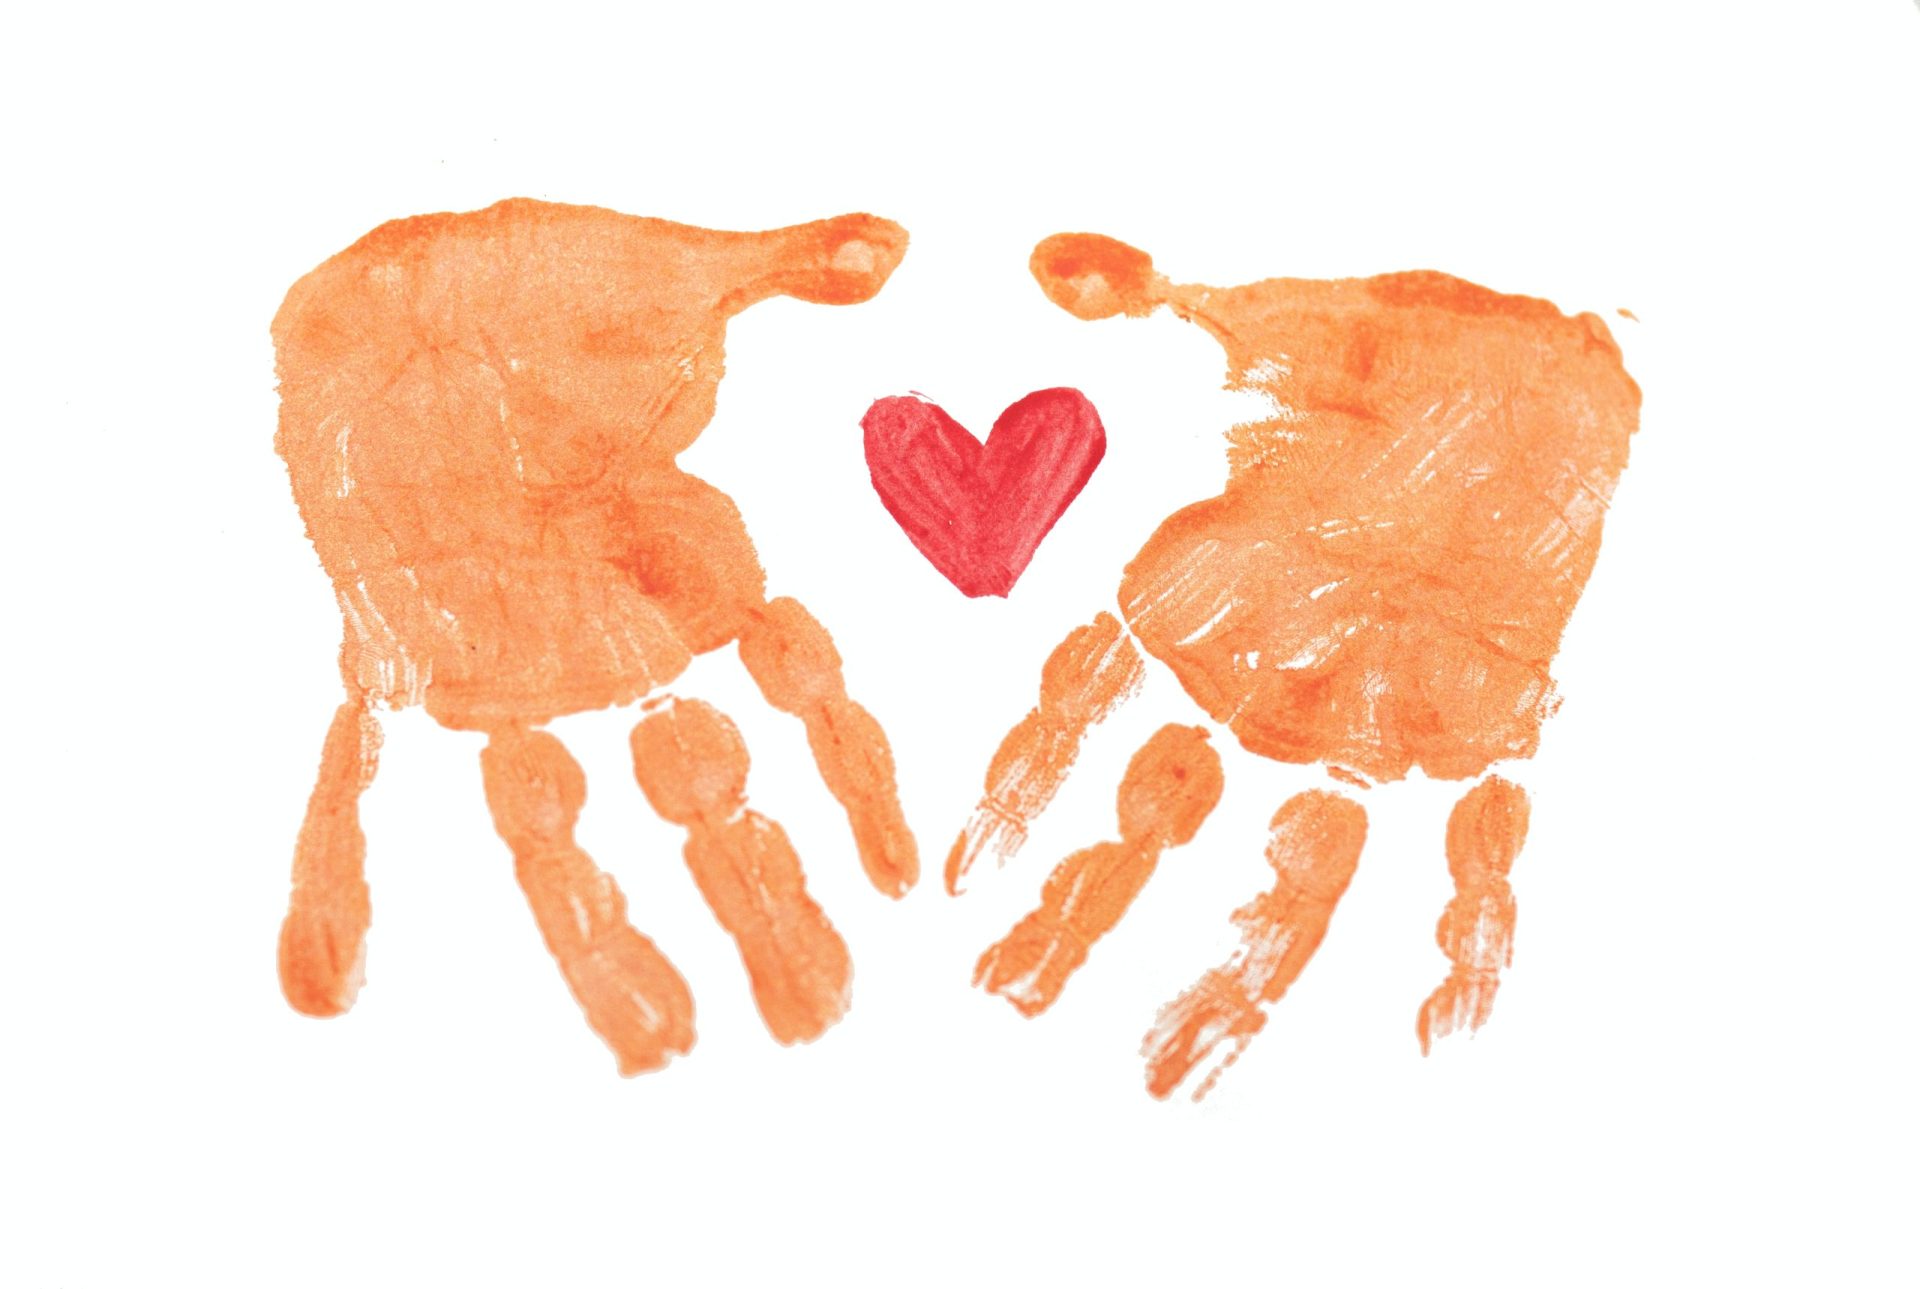 Painted handprints around painted heart